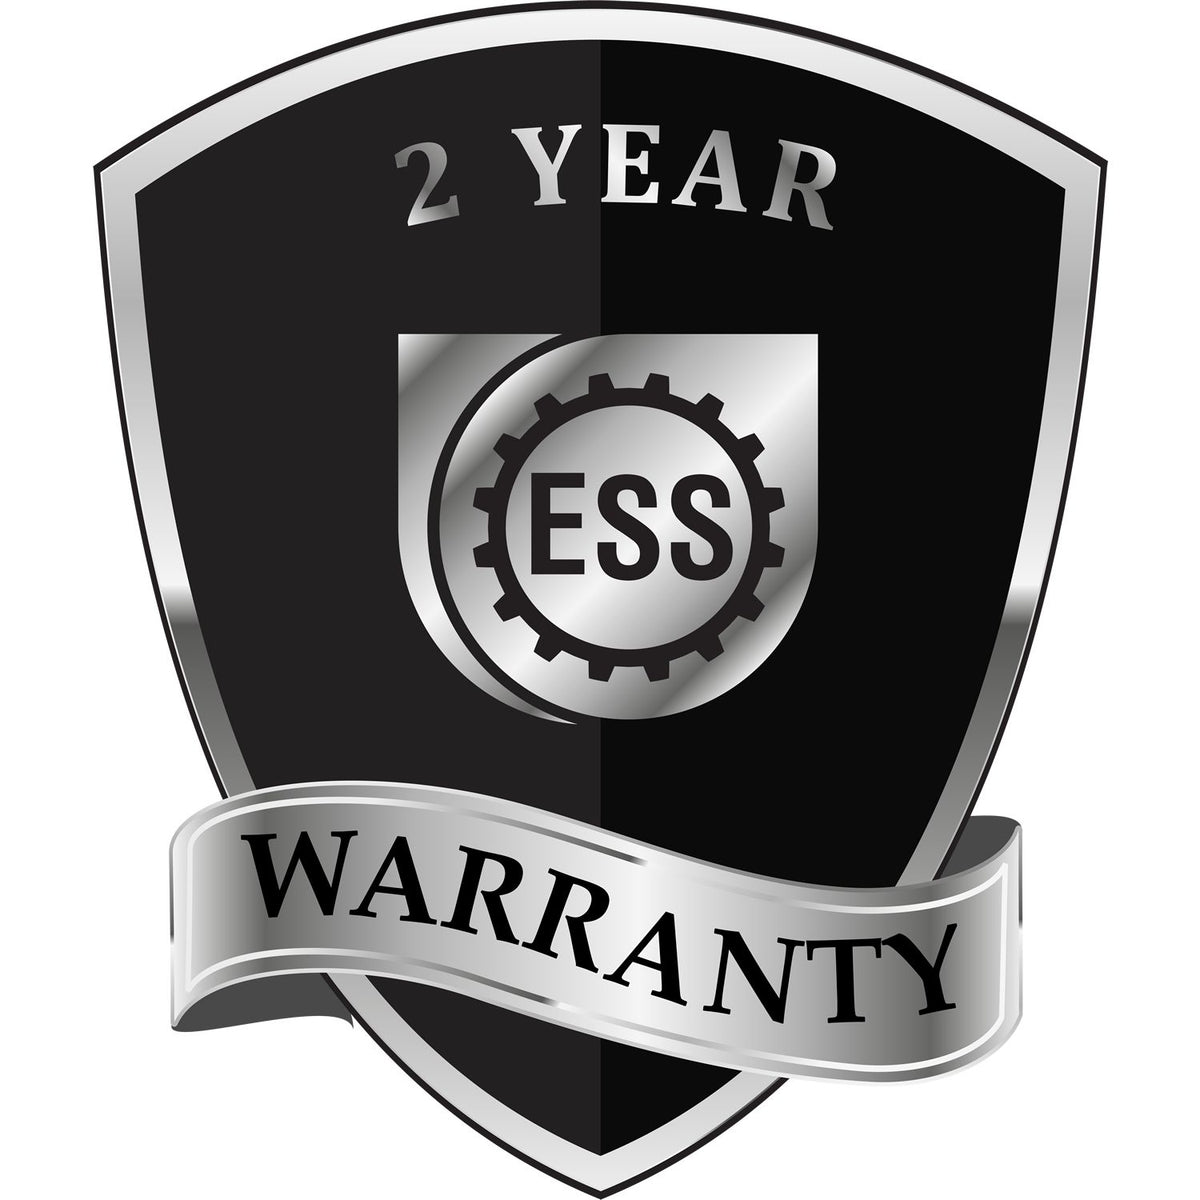 A black and silver badge or emblem showing warranty information for the Gift Georgia Landscape Architect Seal